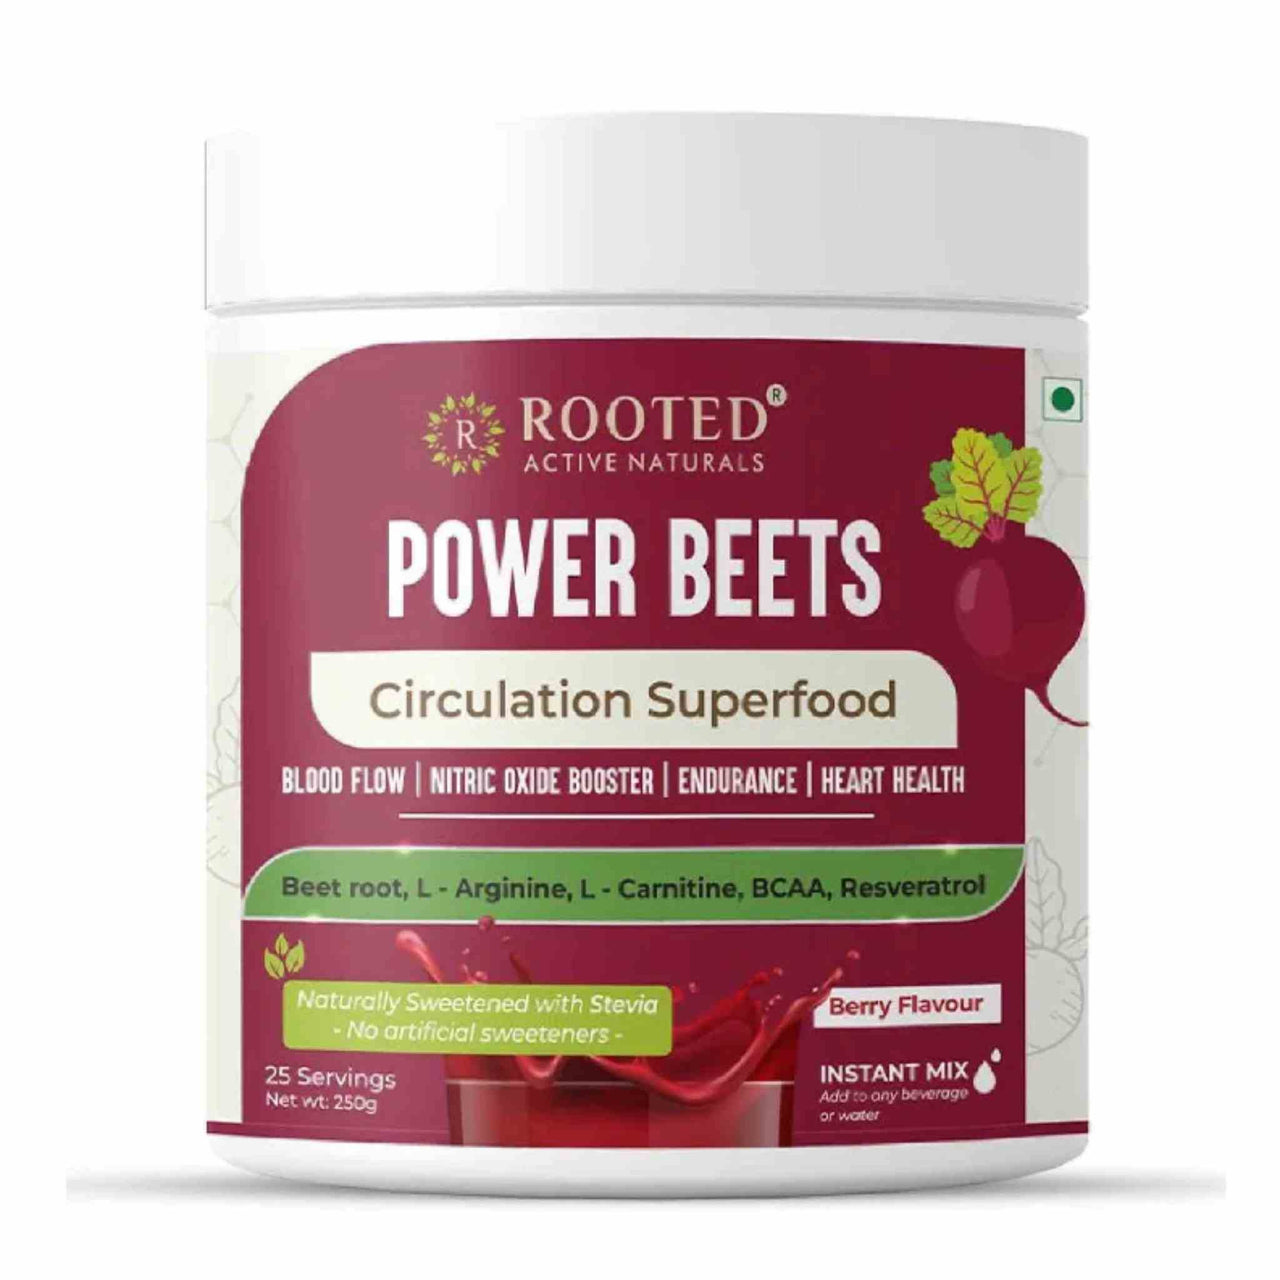 Rooted Actives Power Beets ( 250 g) - Organic Beet root powder with L arginine, L Carnitine, BCAA, Reservatrol & Stevia | Heart, Endurance, Nitric oxide booster